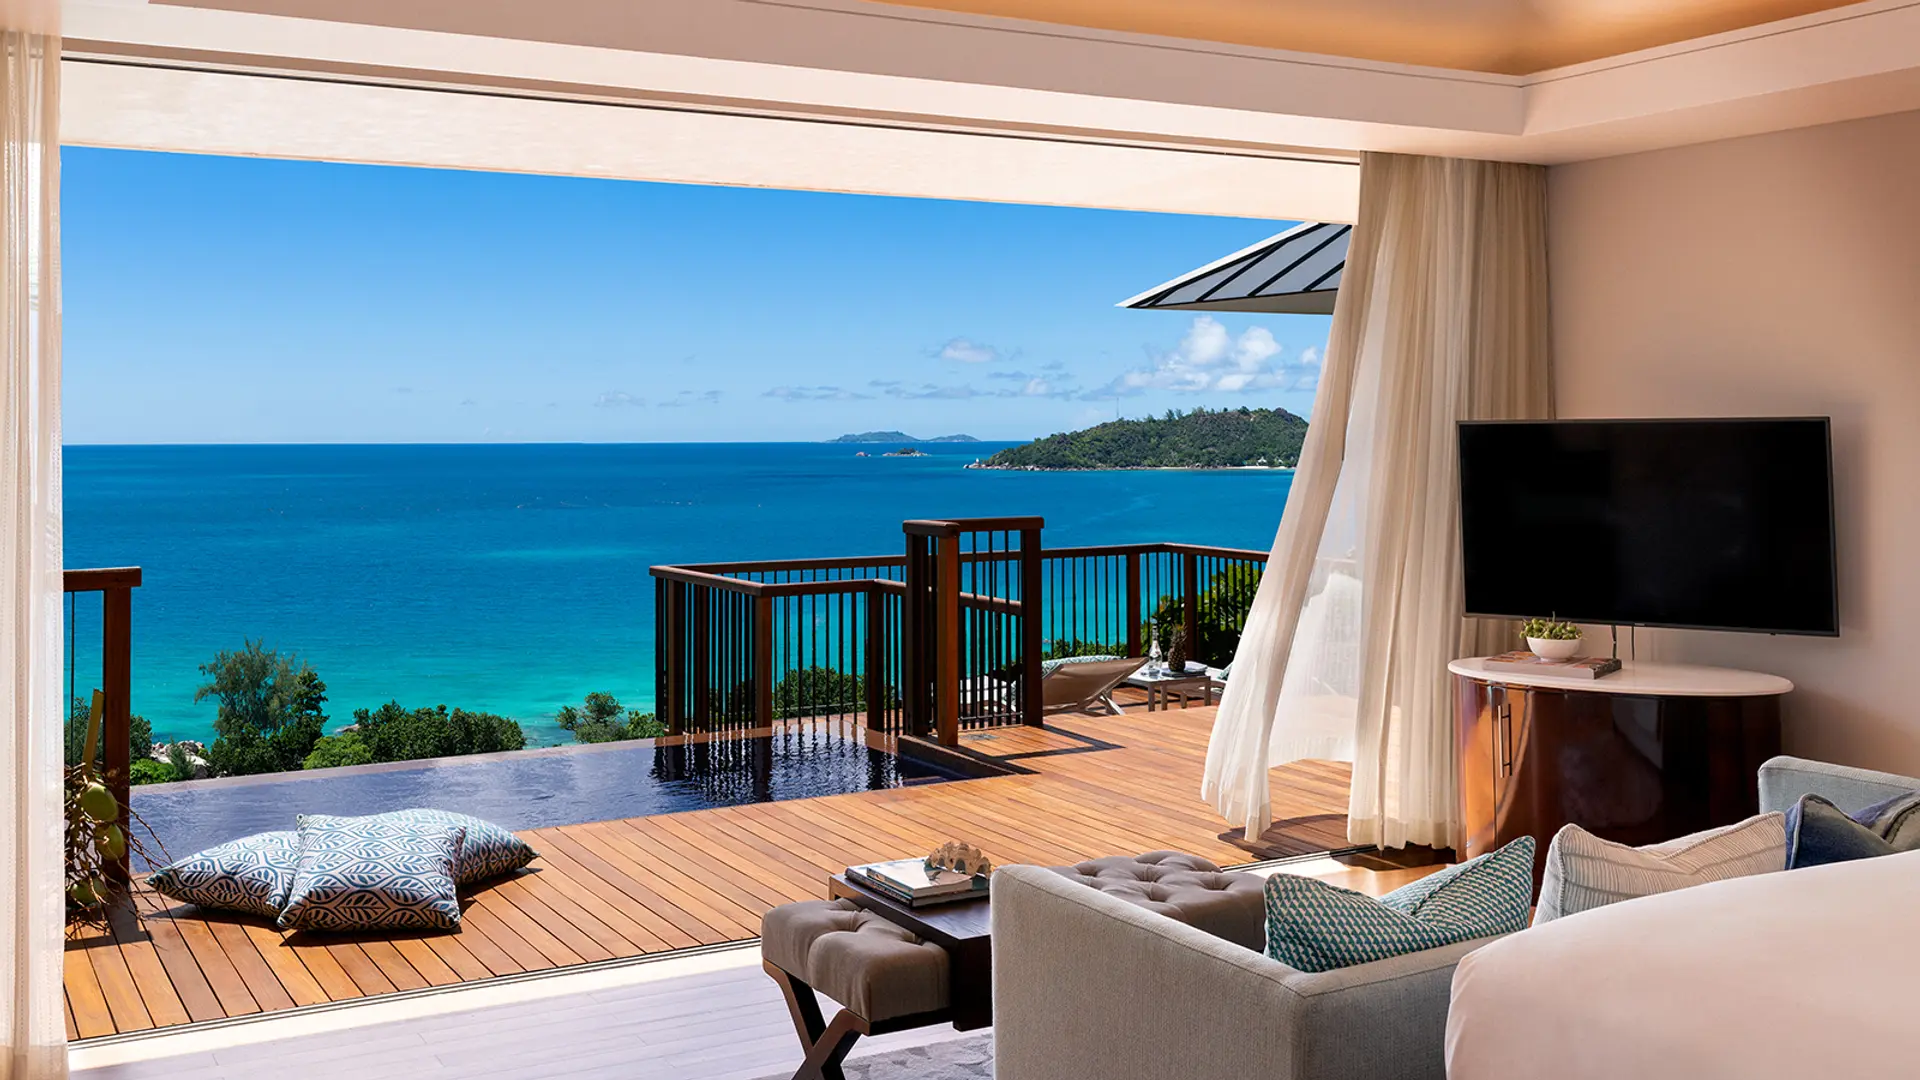 Hotels Toplists - The Best Luxury Hotels In The Seychelles